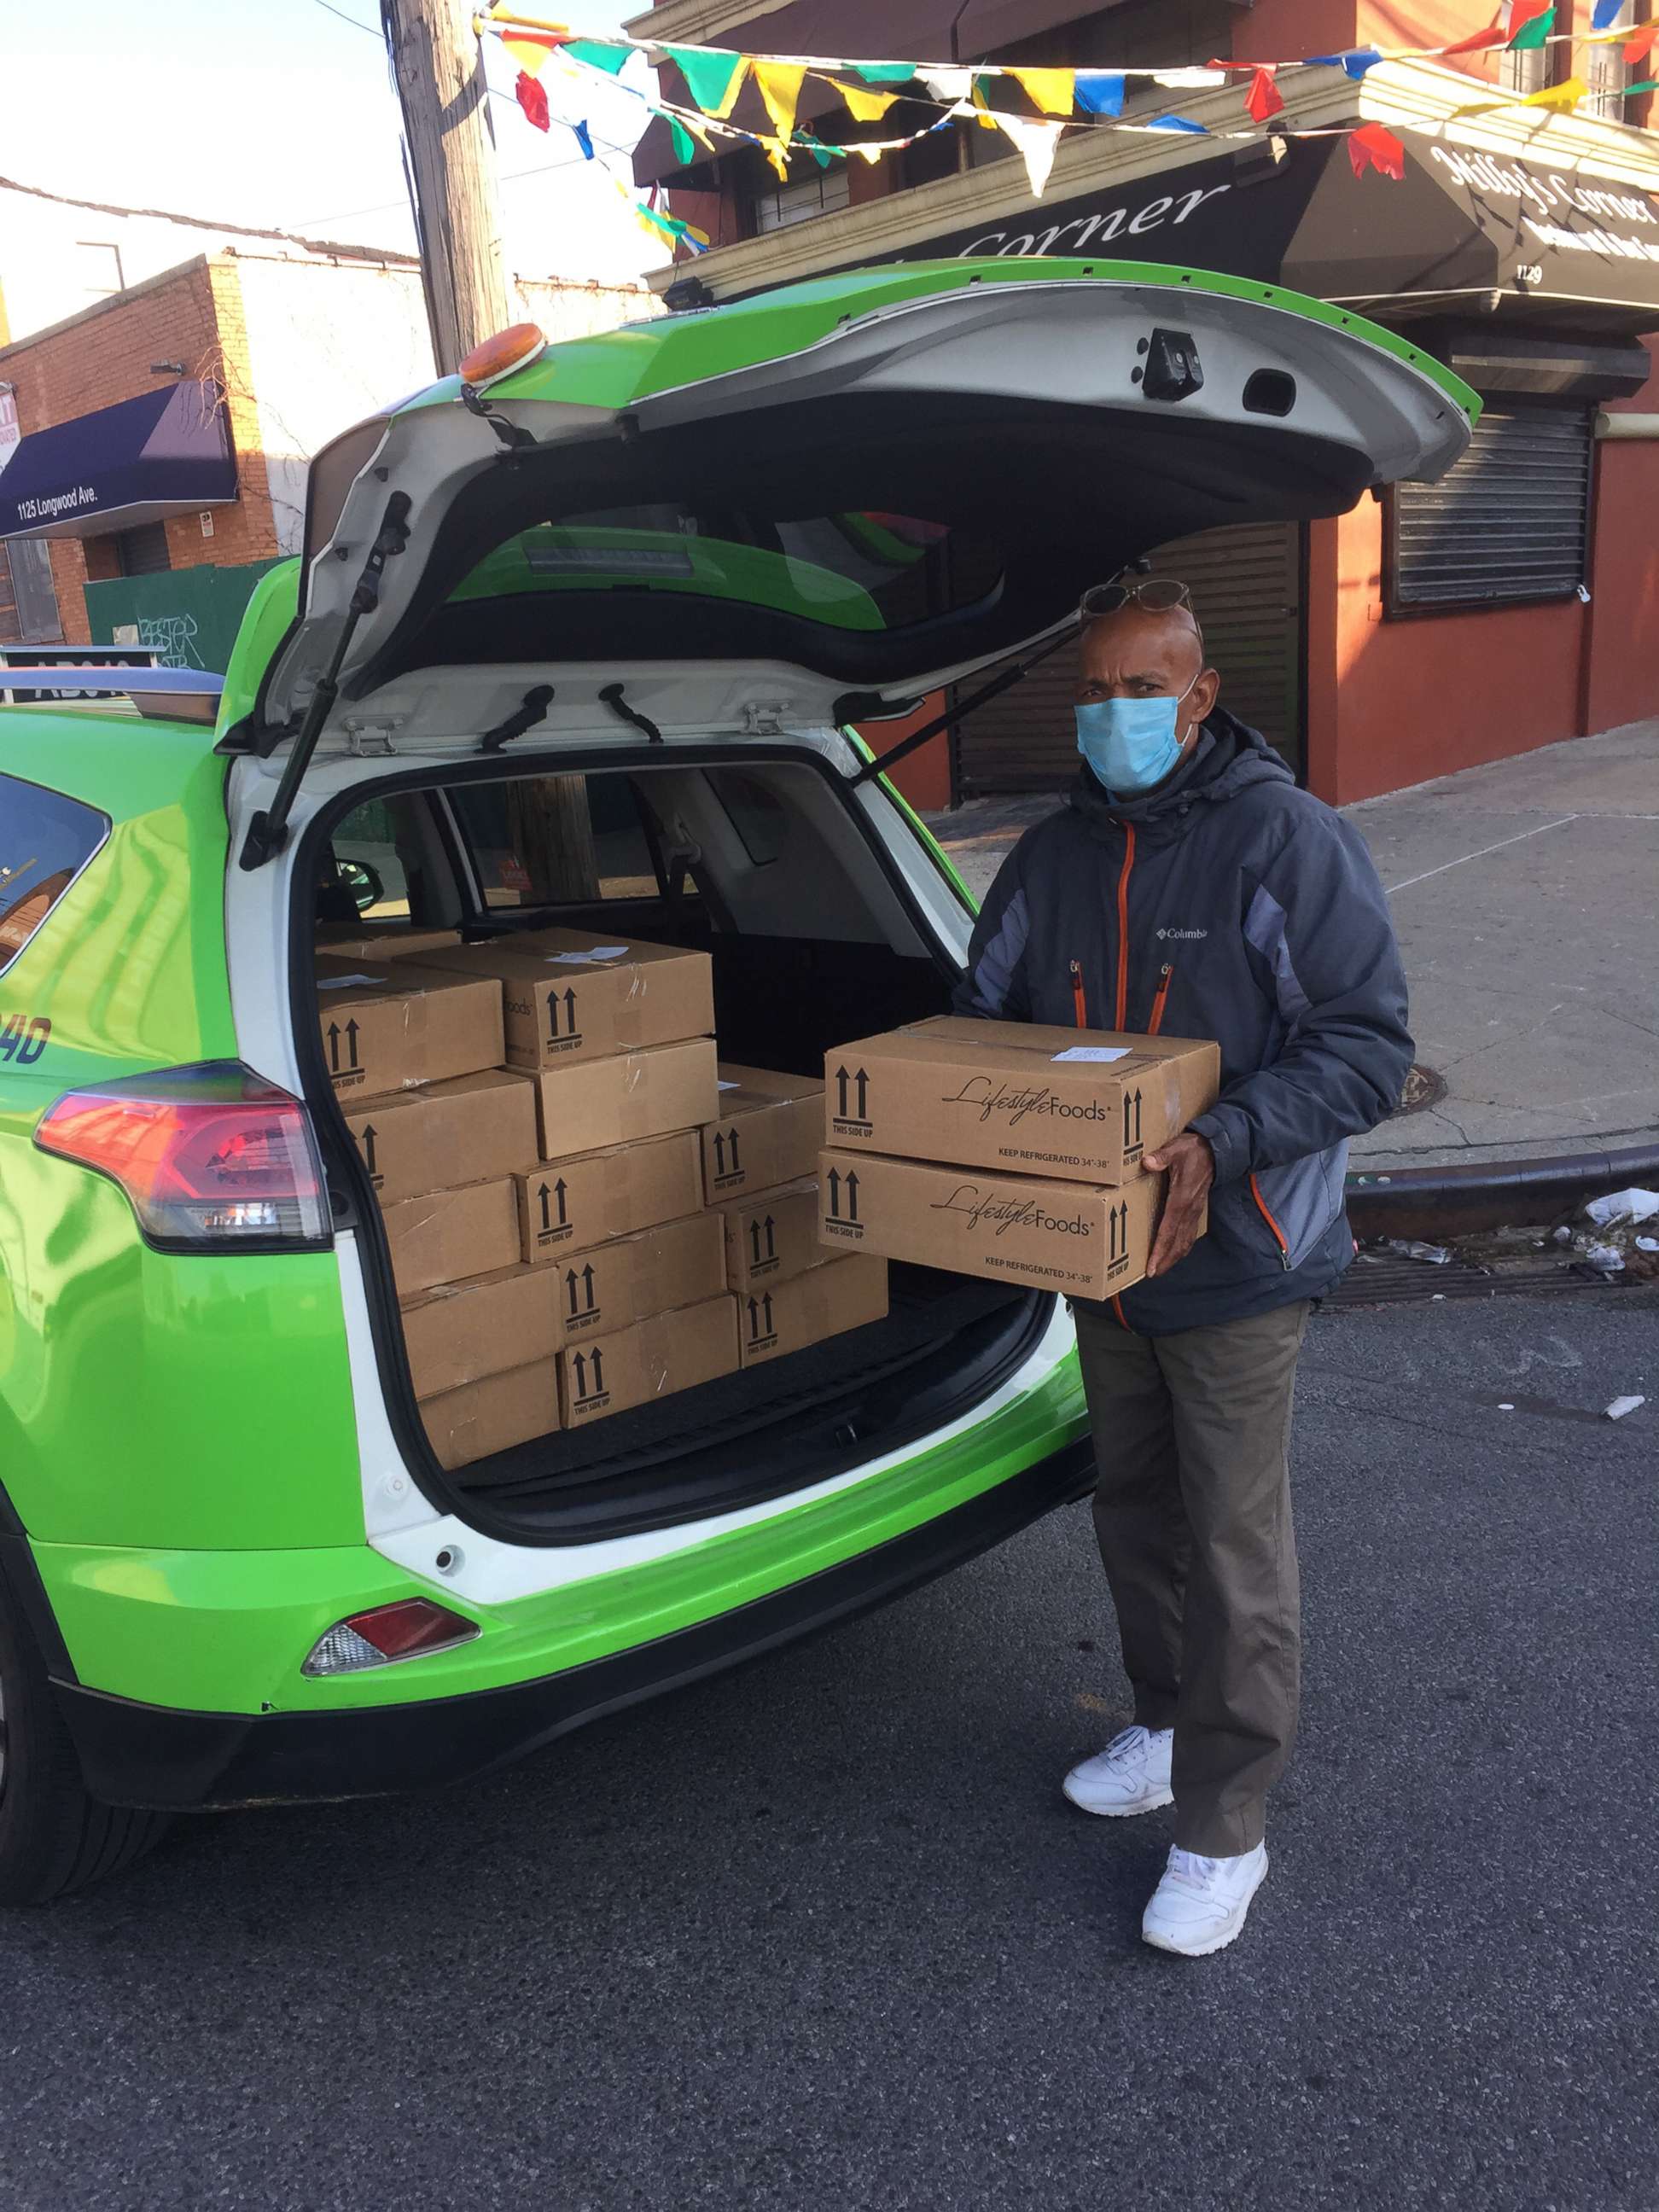 PHOTO: A green taxi driver delivers emergency food to vulnerable Bronx residents, such as the elderly and immunocompromised.